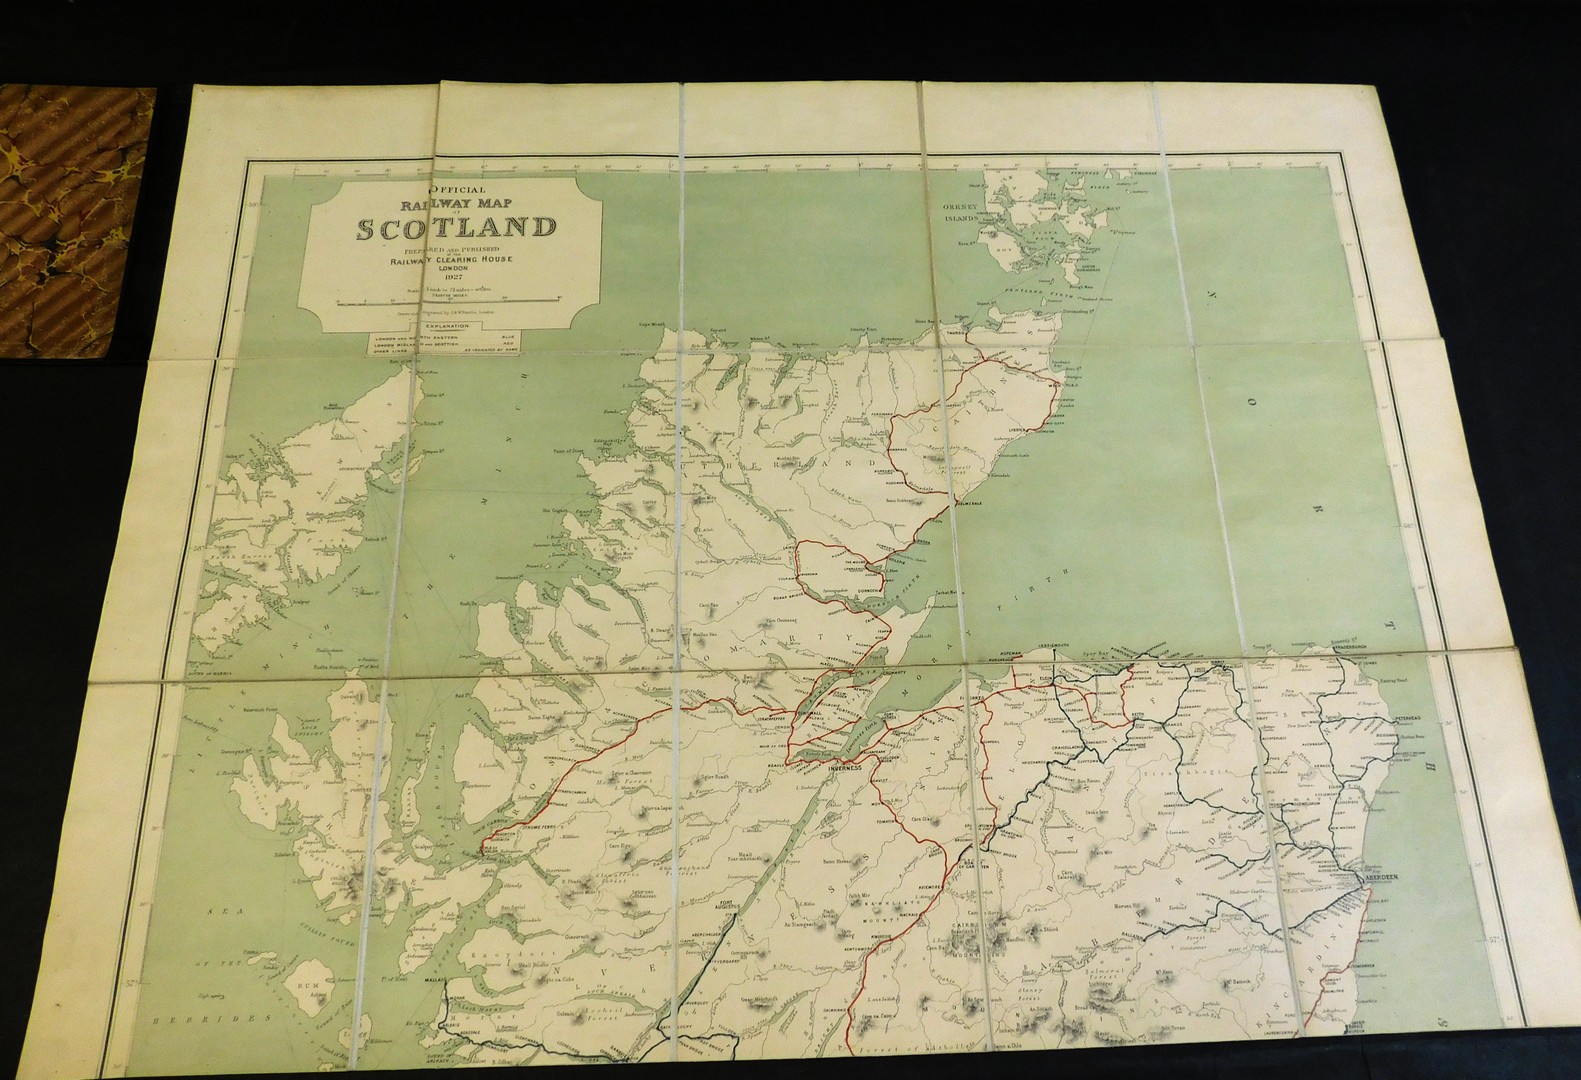 J & W EMSLIE: OFFICIAL RAILWAY MAP OF SCOTLAND, London, The Railway Clearing House 1927, folding